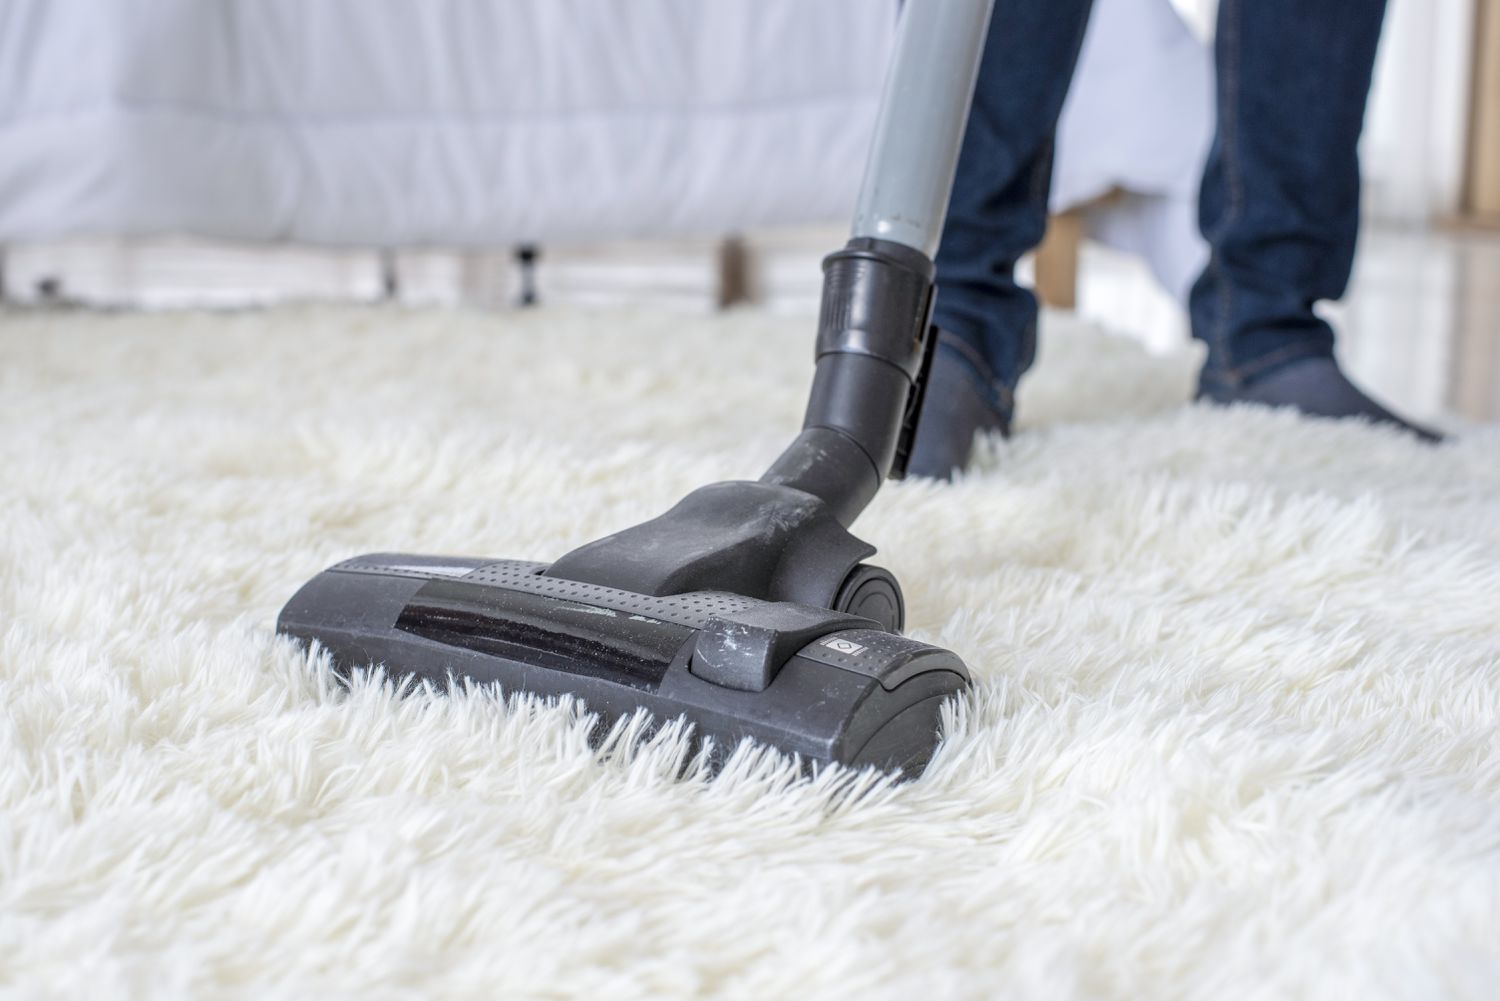 How To Use Carpet Cleaner With A Vacuum